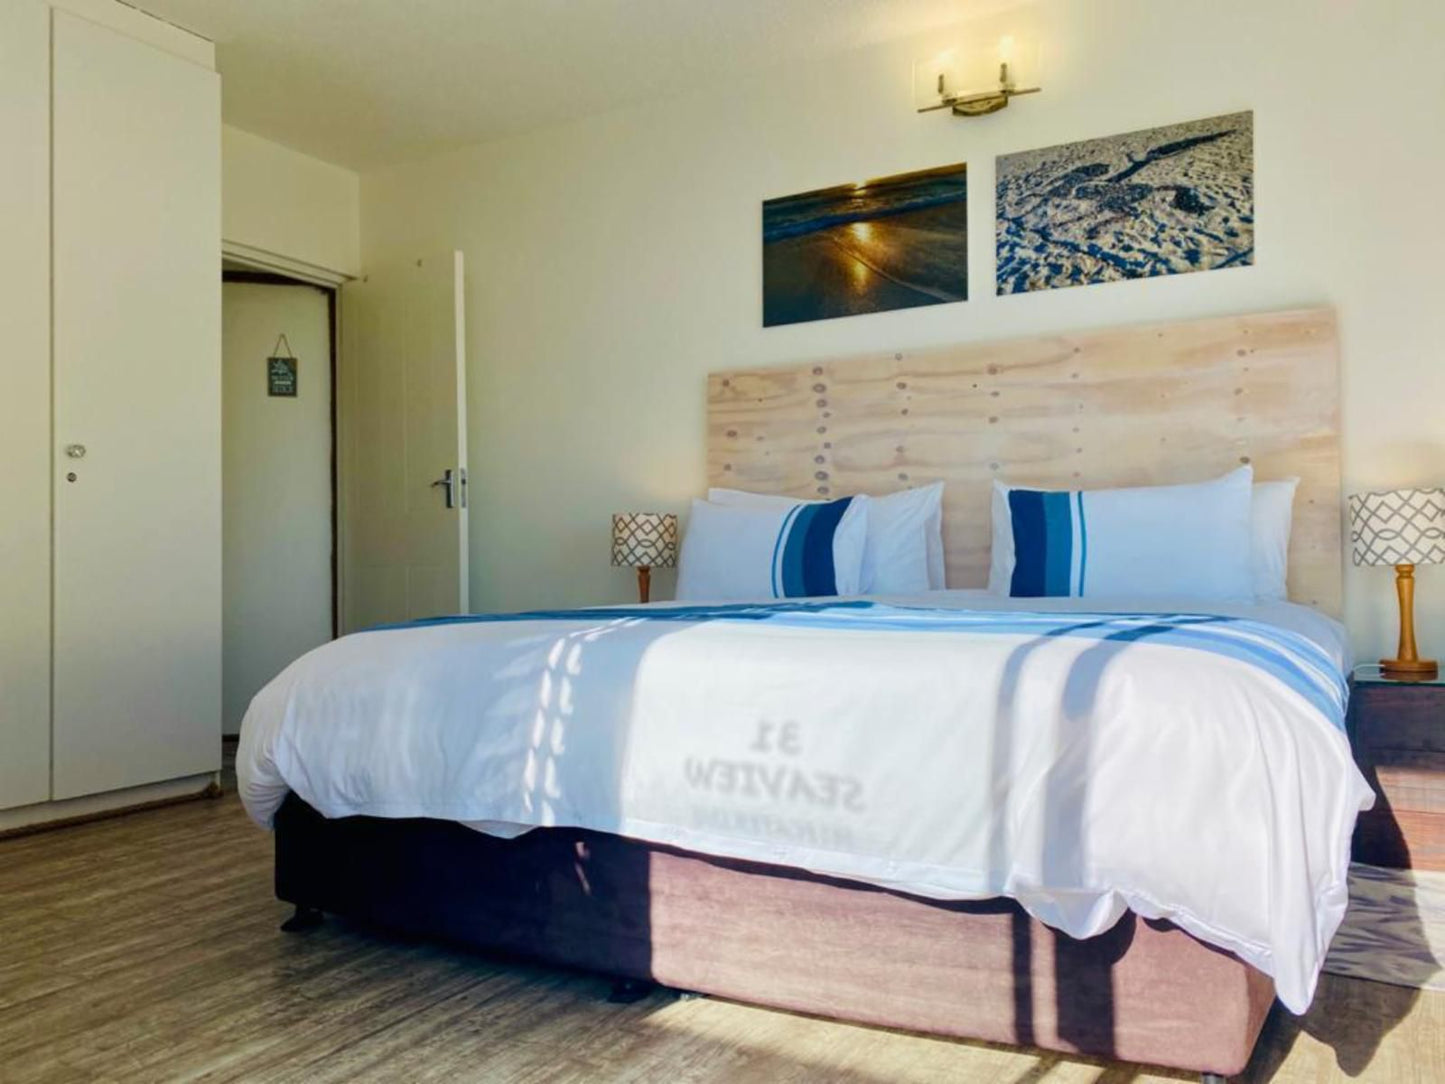 31 On Seaview Self Catering Yzerfontein Yzerfontein Western Cape South Africa Bedroom